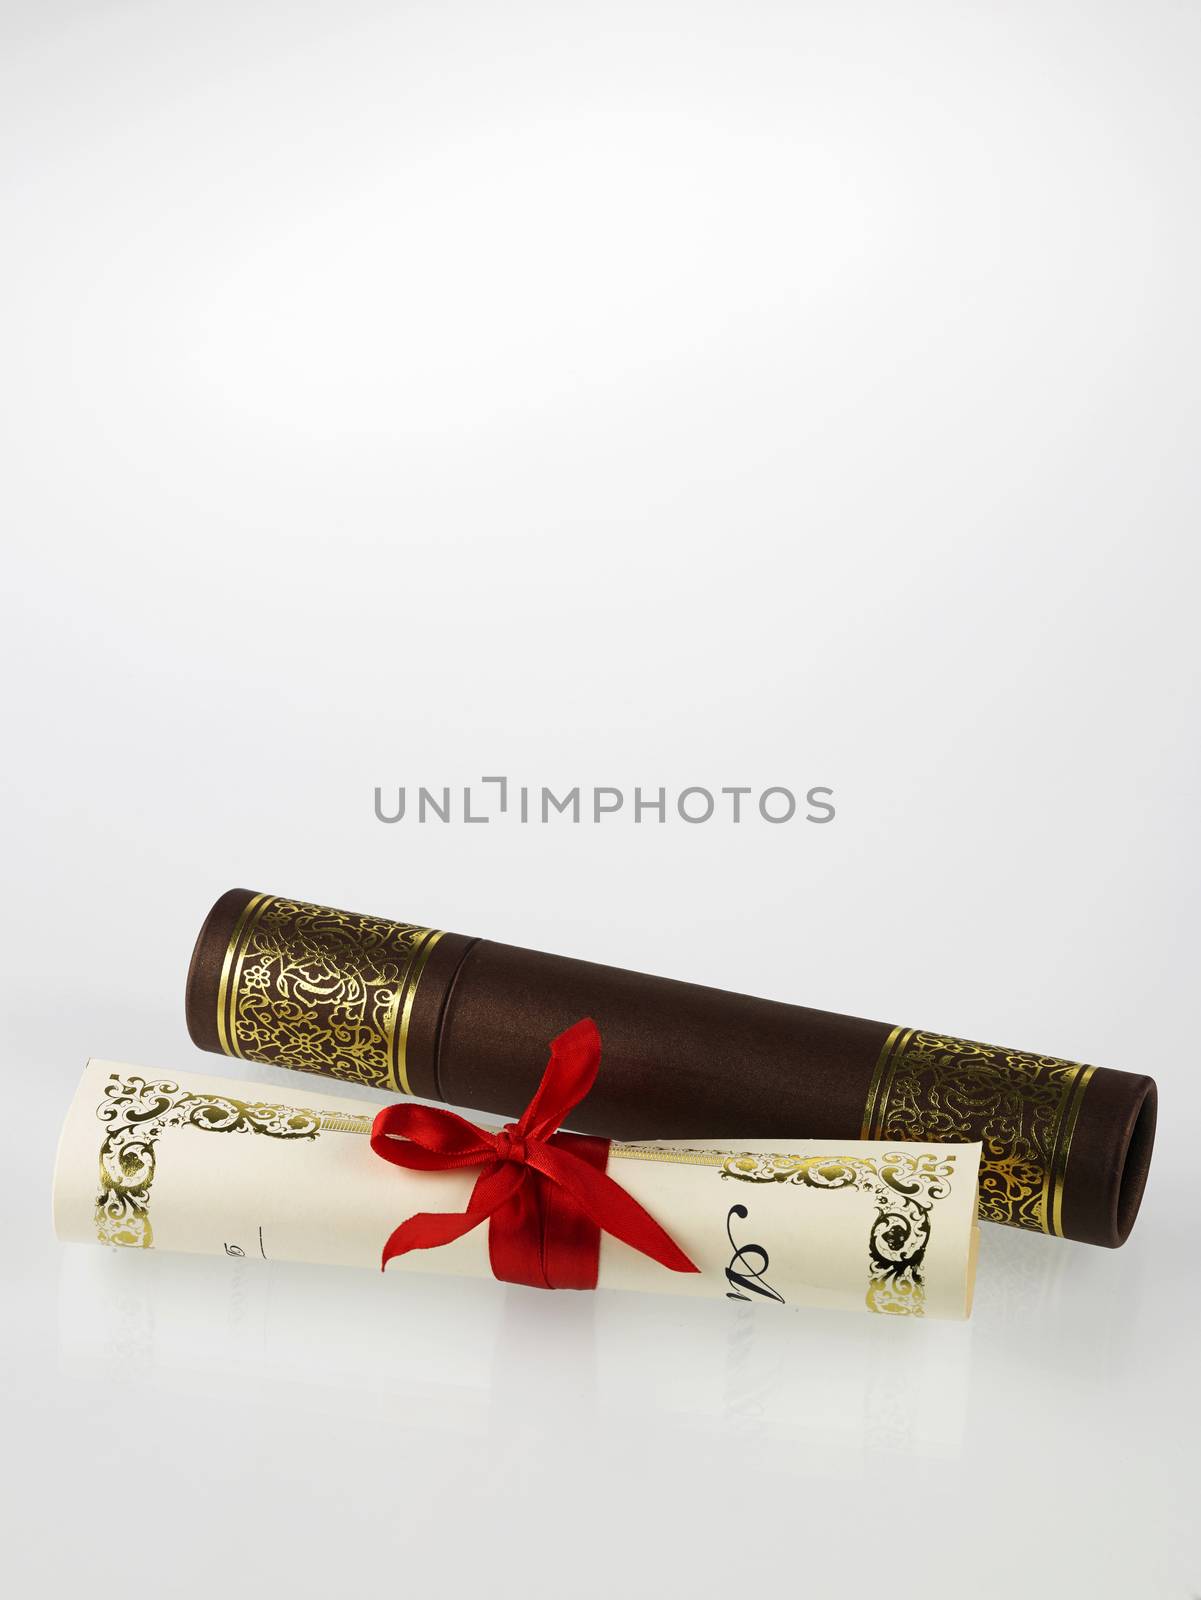 Red Scroll Container and certificate by eskaylim